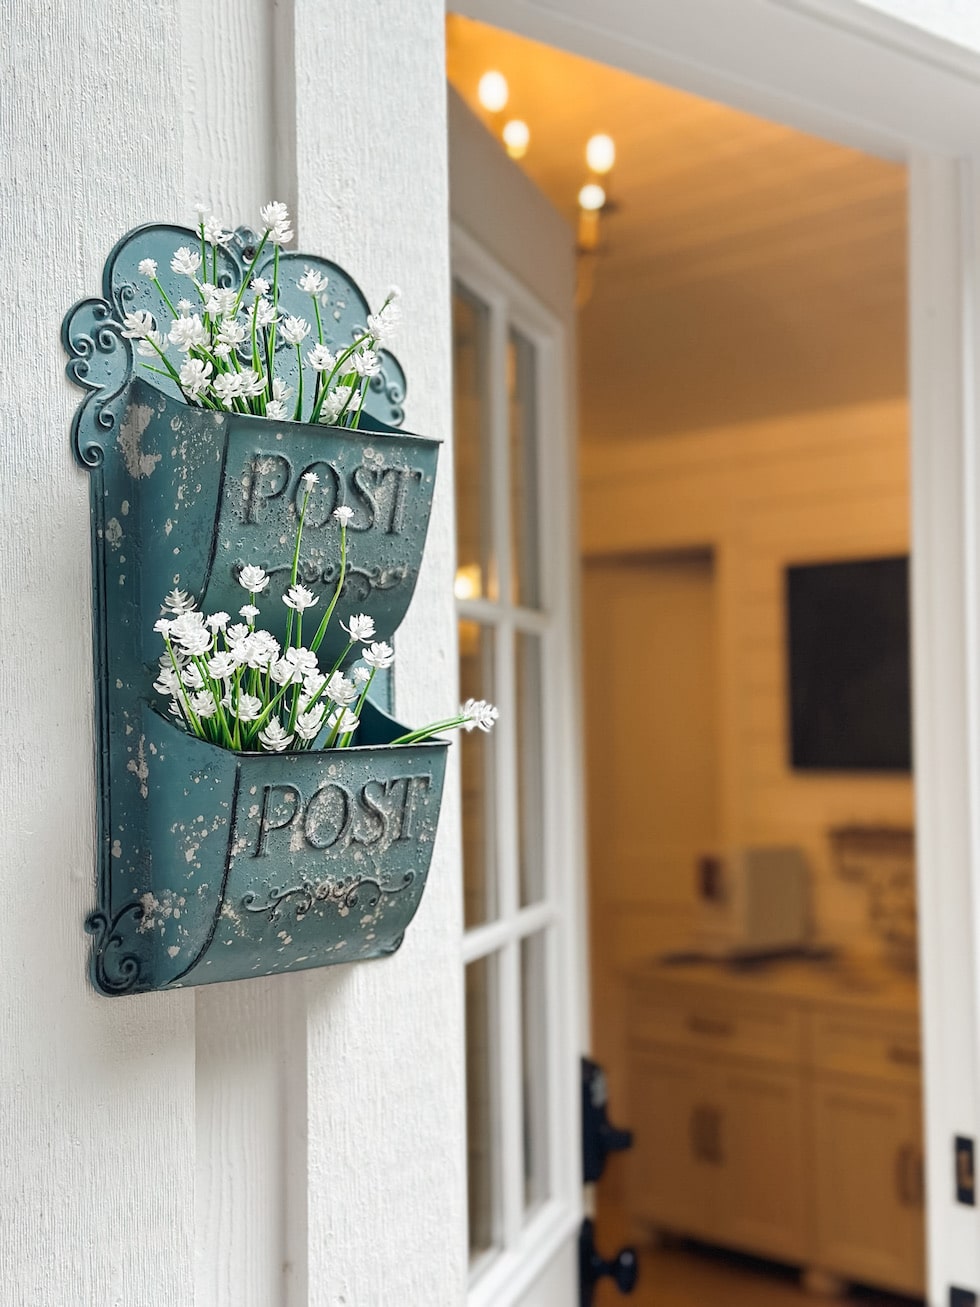 Spring in the Tiny Cottage: A Reflection on Having Less in a Cottage by the Sea